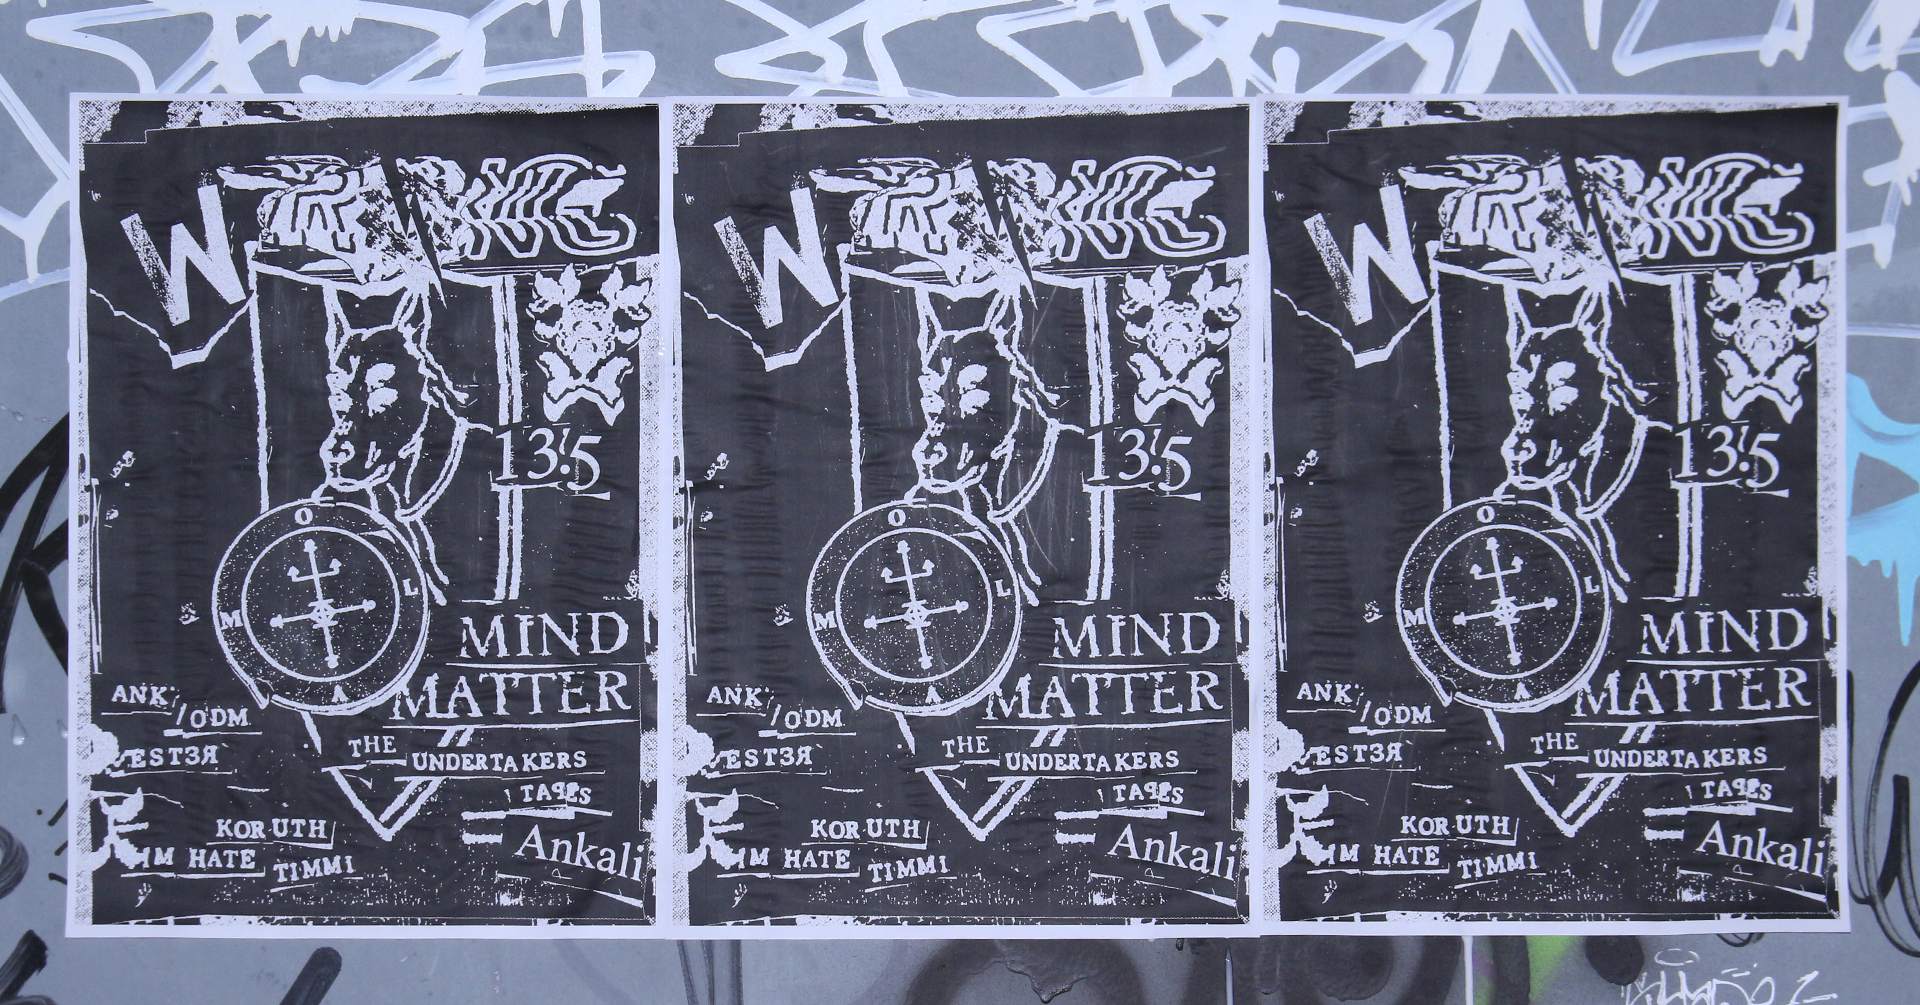 Wrong x OLAM: MIND I MATTER, ANK, ODM, Ester, The Undertaker's Tapes, Opioid Slot Machine - Página frontal